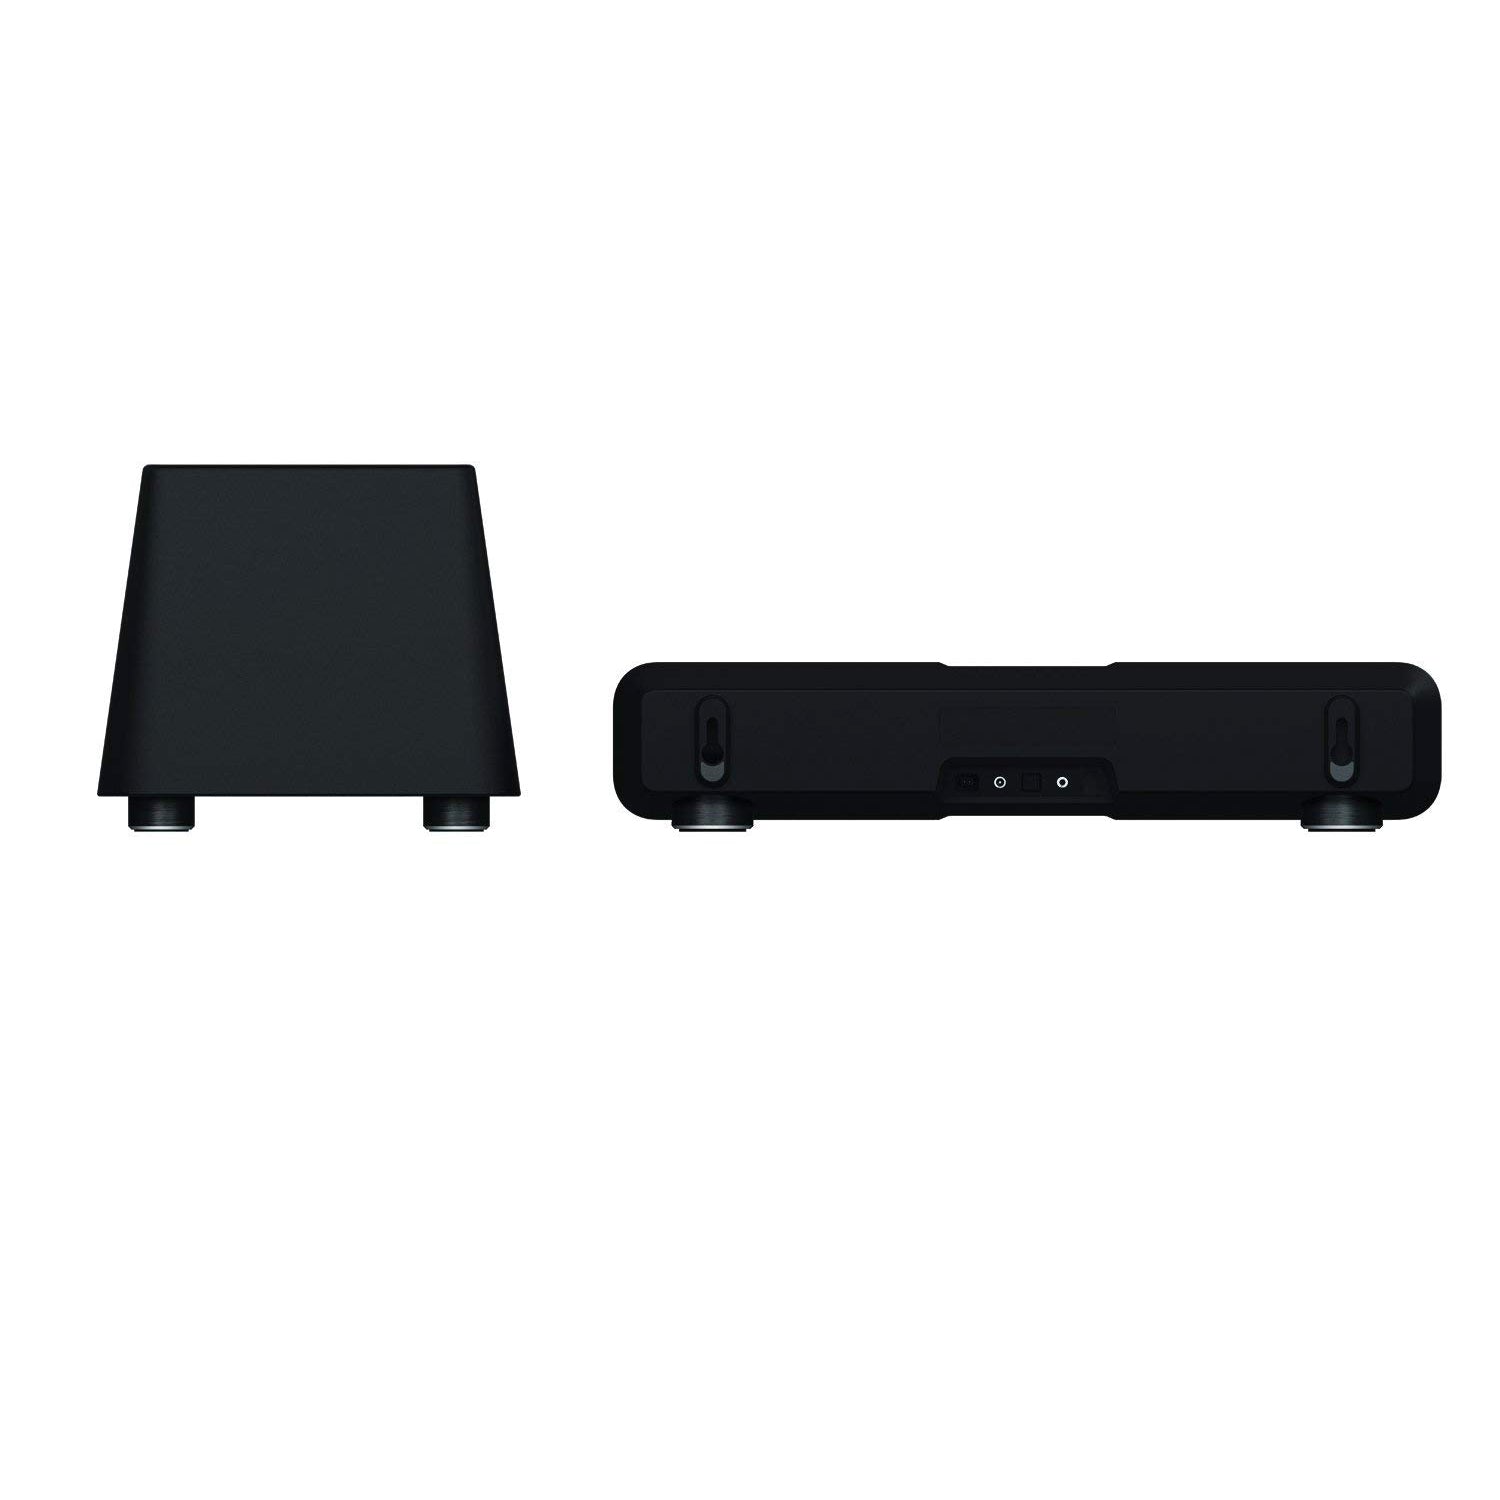 Razer - Leviathan: Dolby 5.1 Surround Sound – PC Gaming and Music Sound Bar